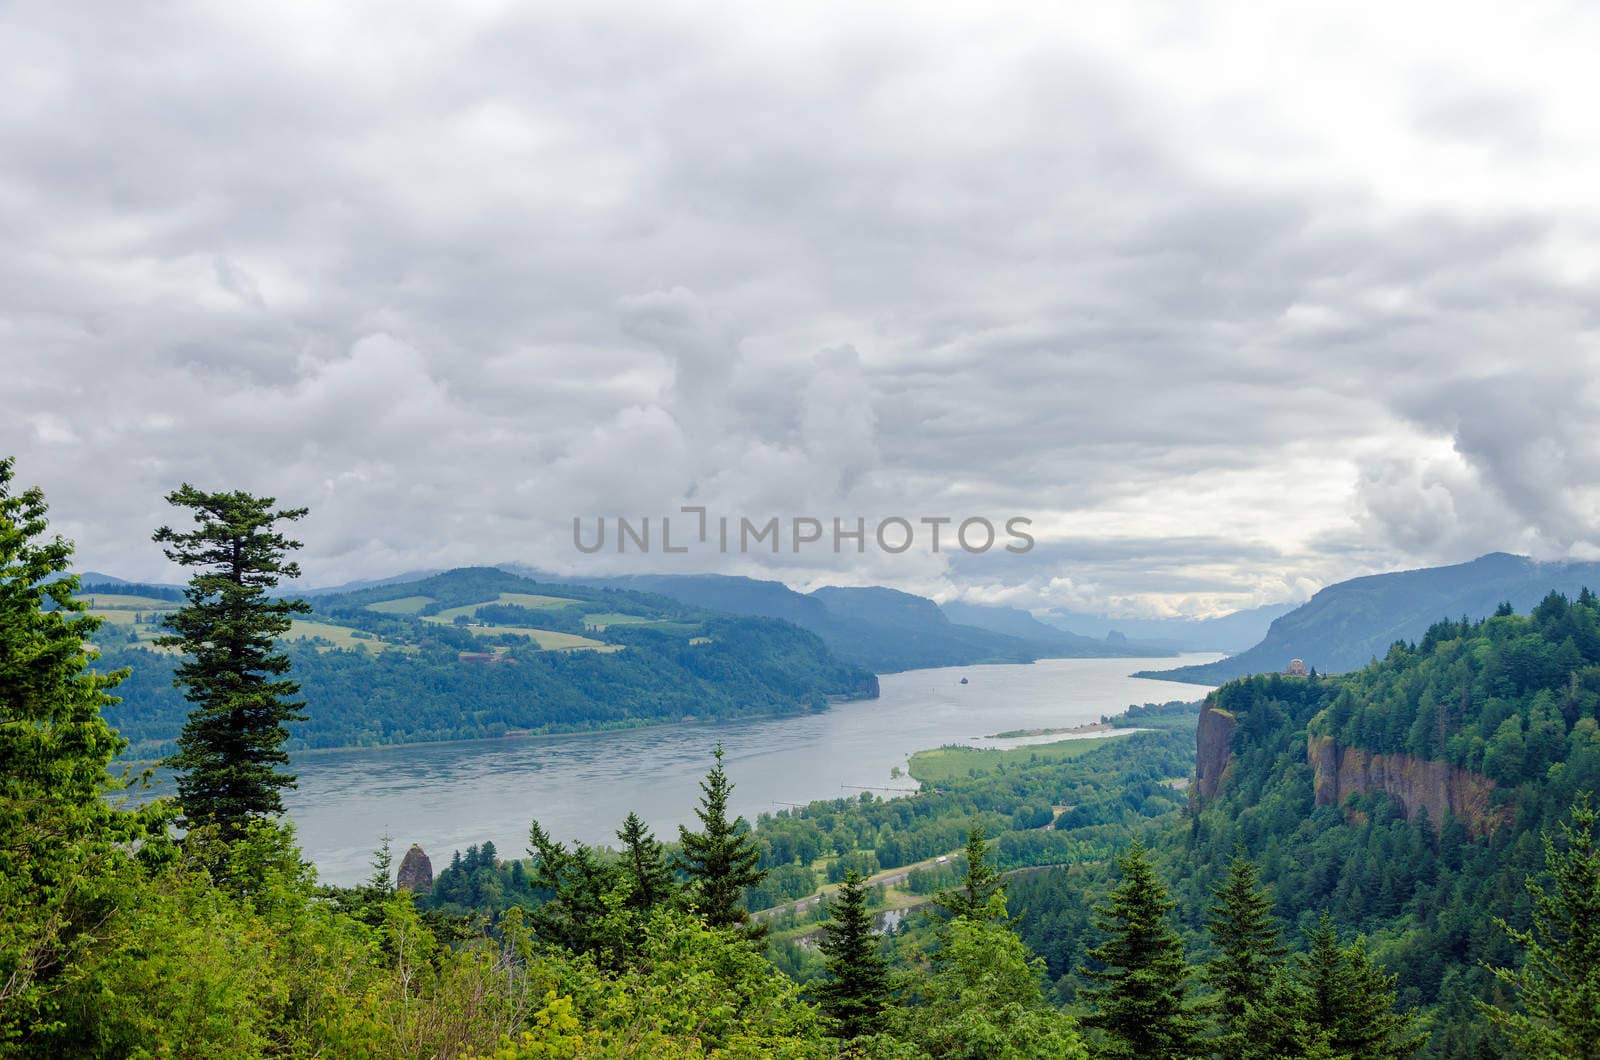 Clouds over the Columbia River by jkraft5